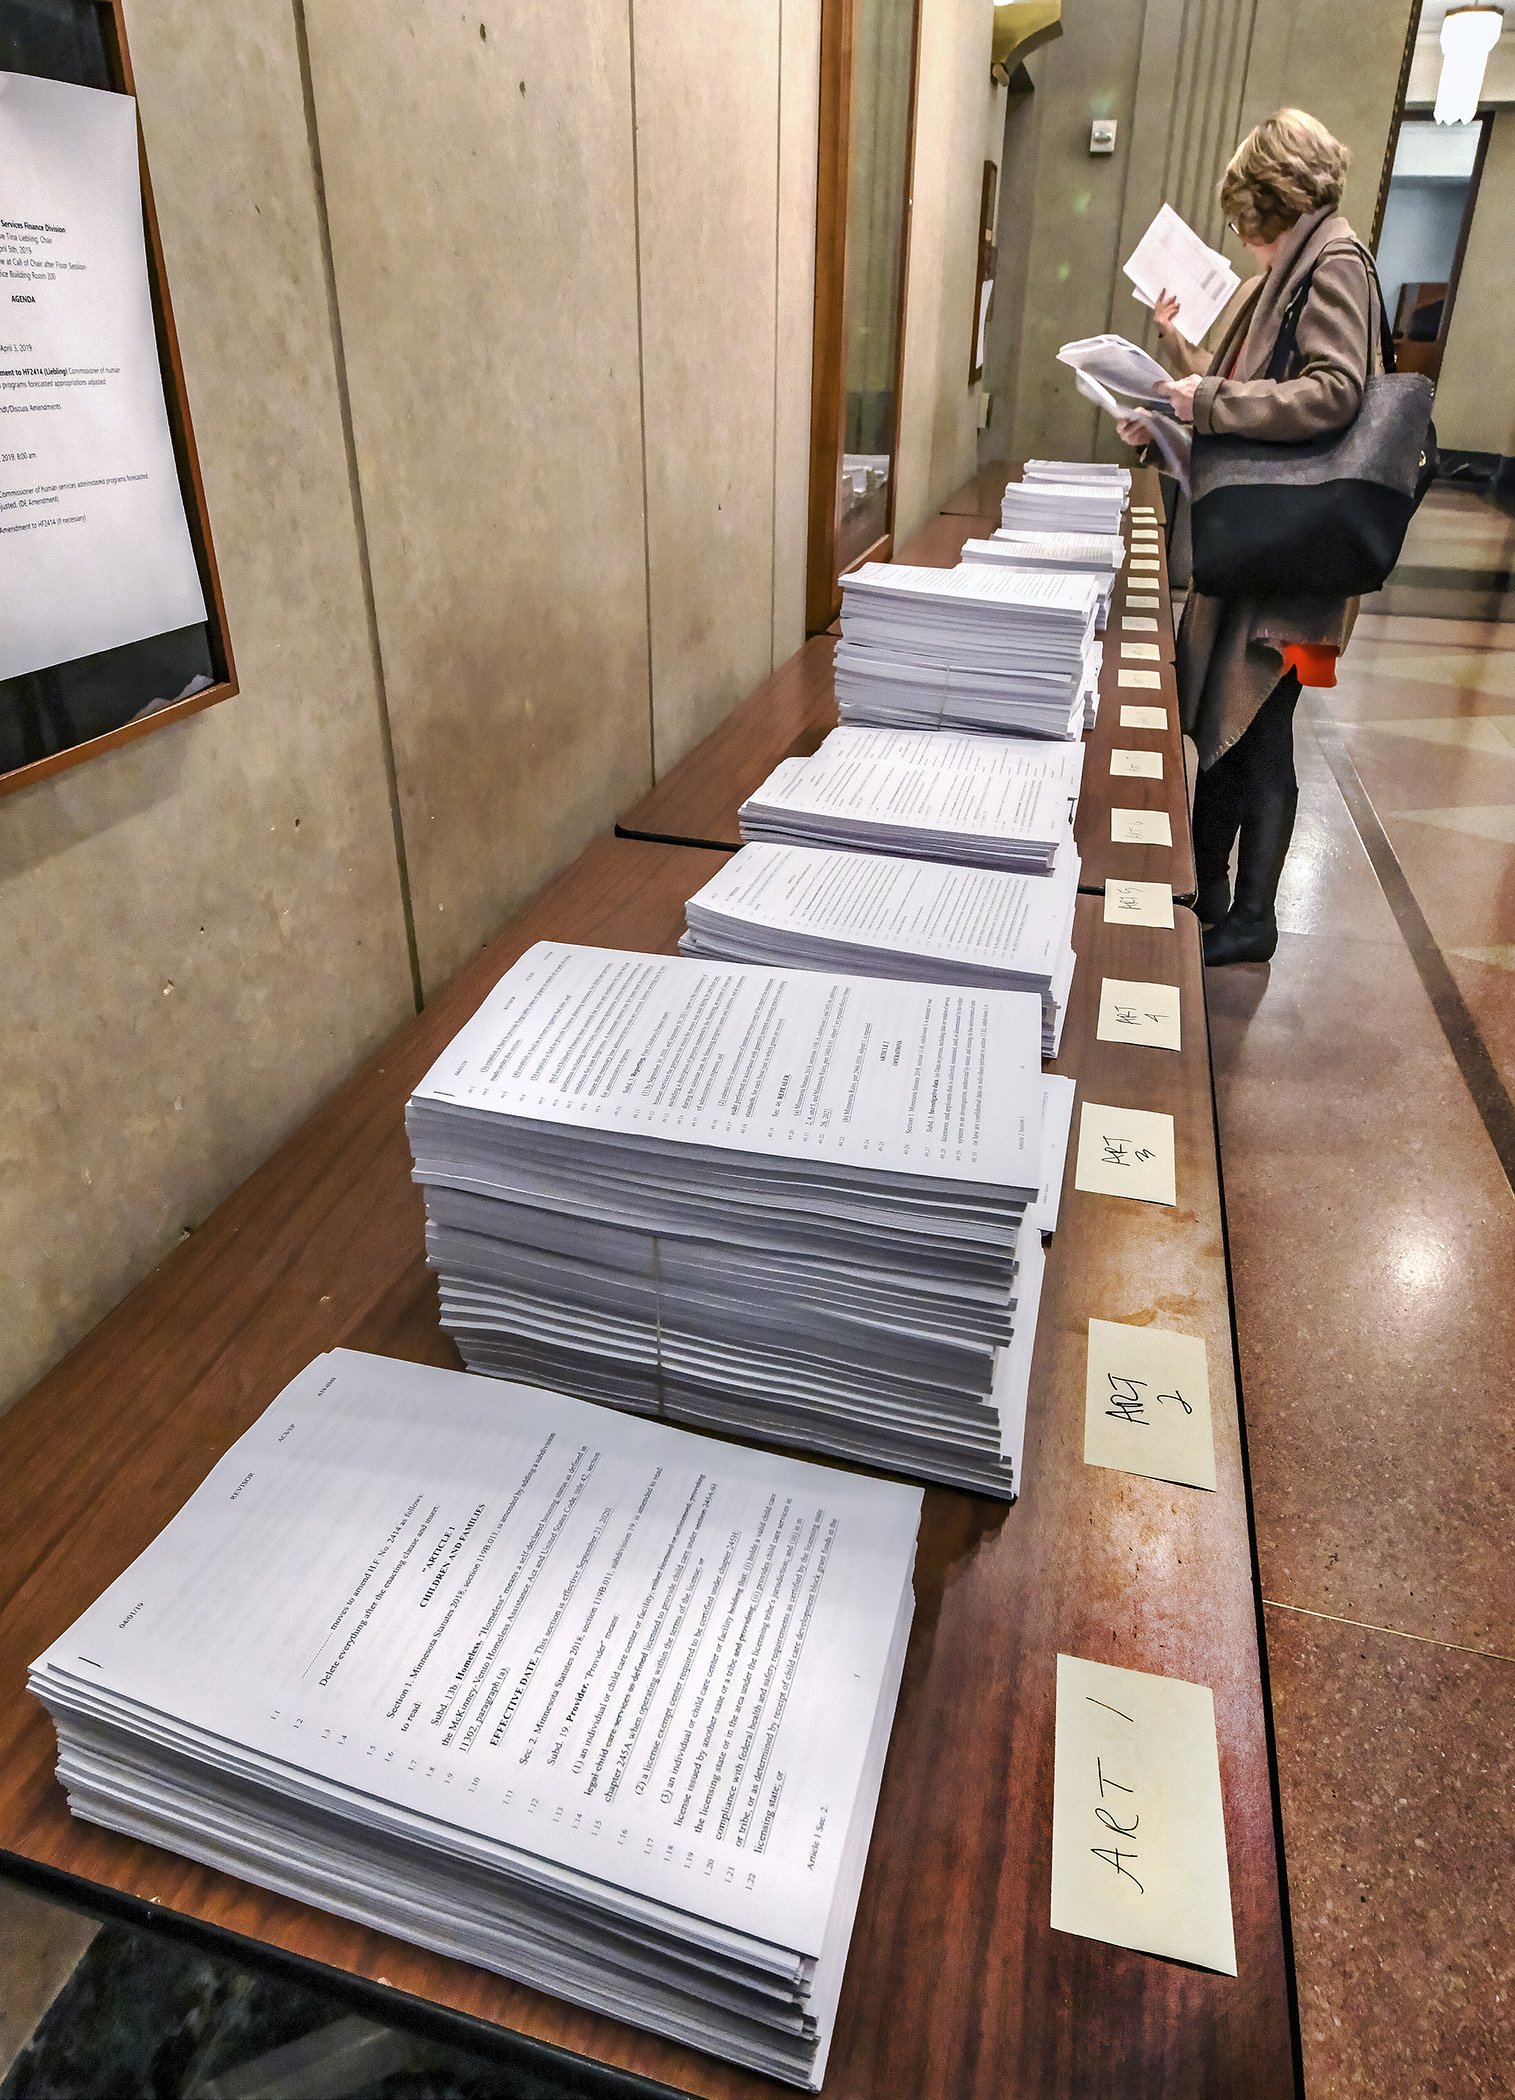 More than 80 amendments are spread out for distribution Friday morning as the House Health and Human Services Finance Division races to finish its omnibus bill. Photo by Andrew VonBank